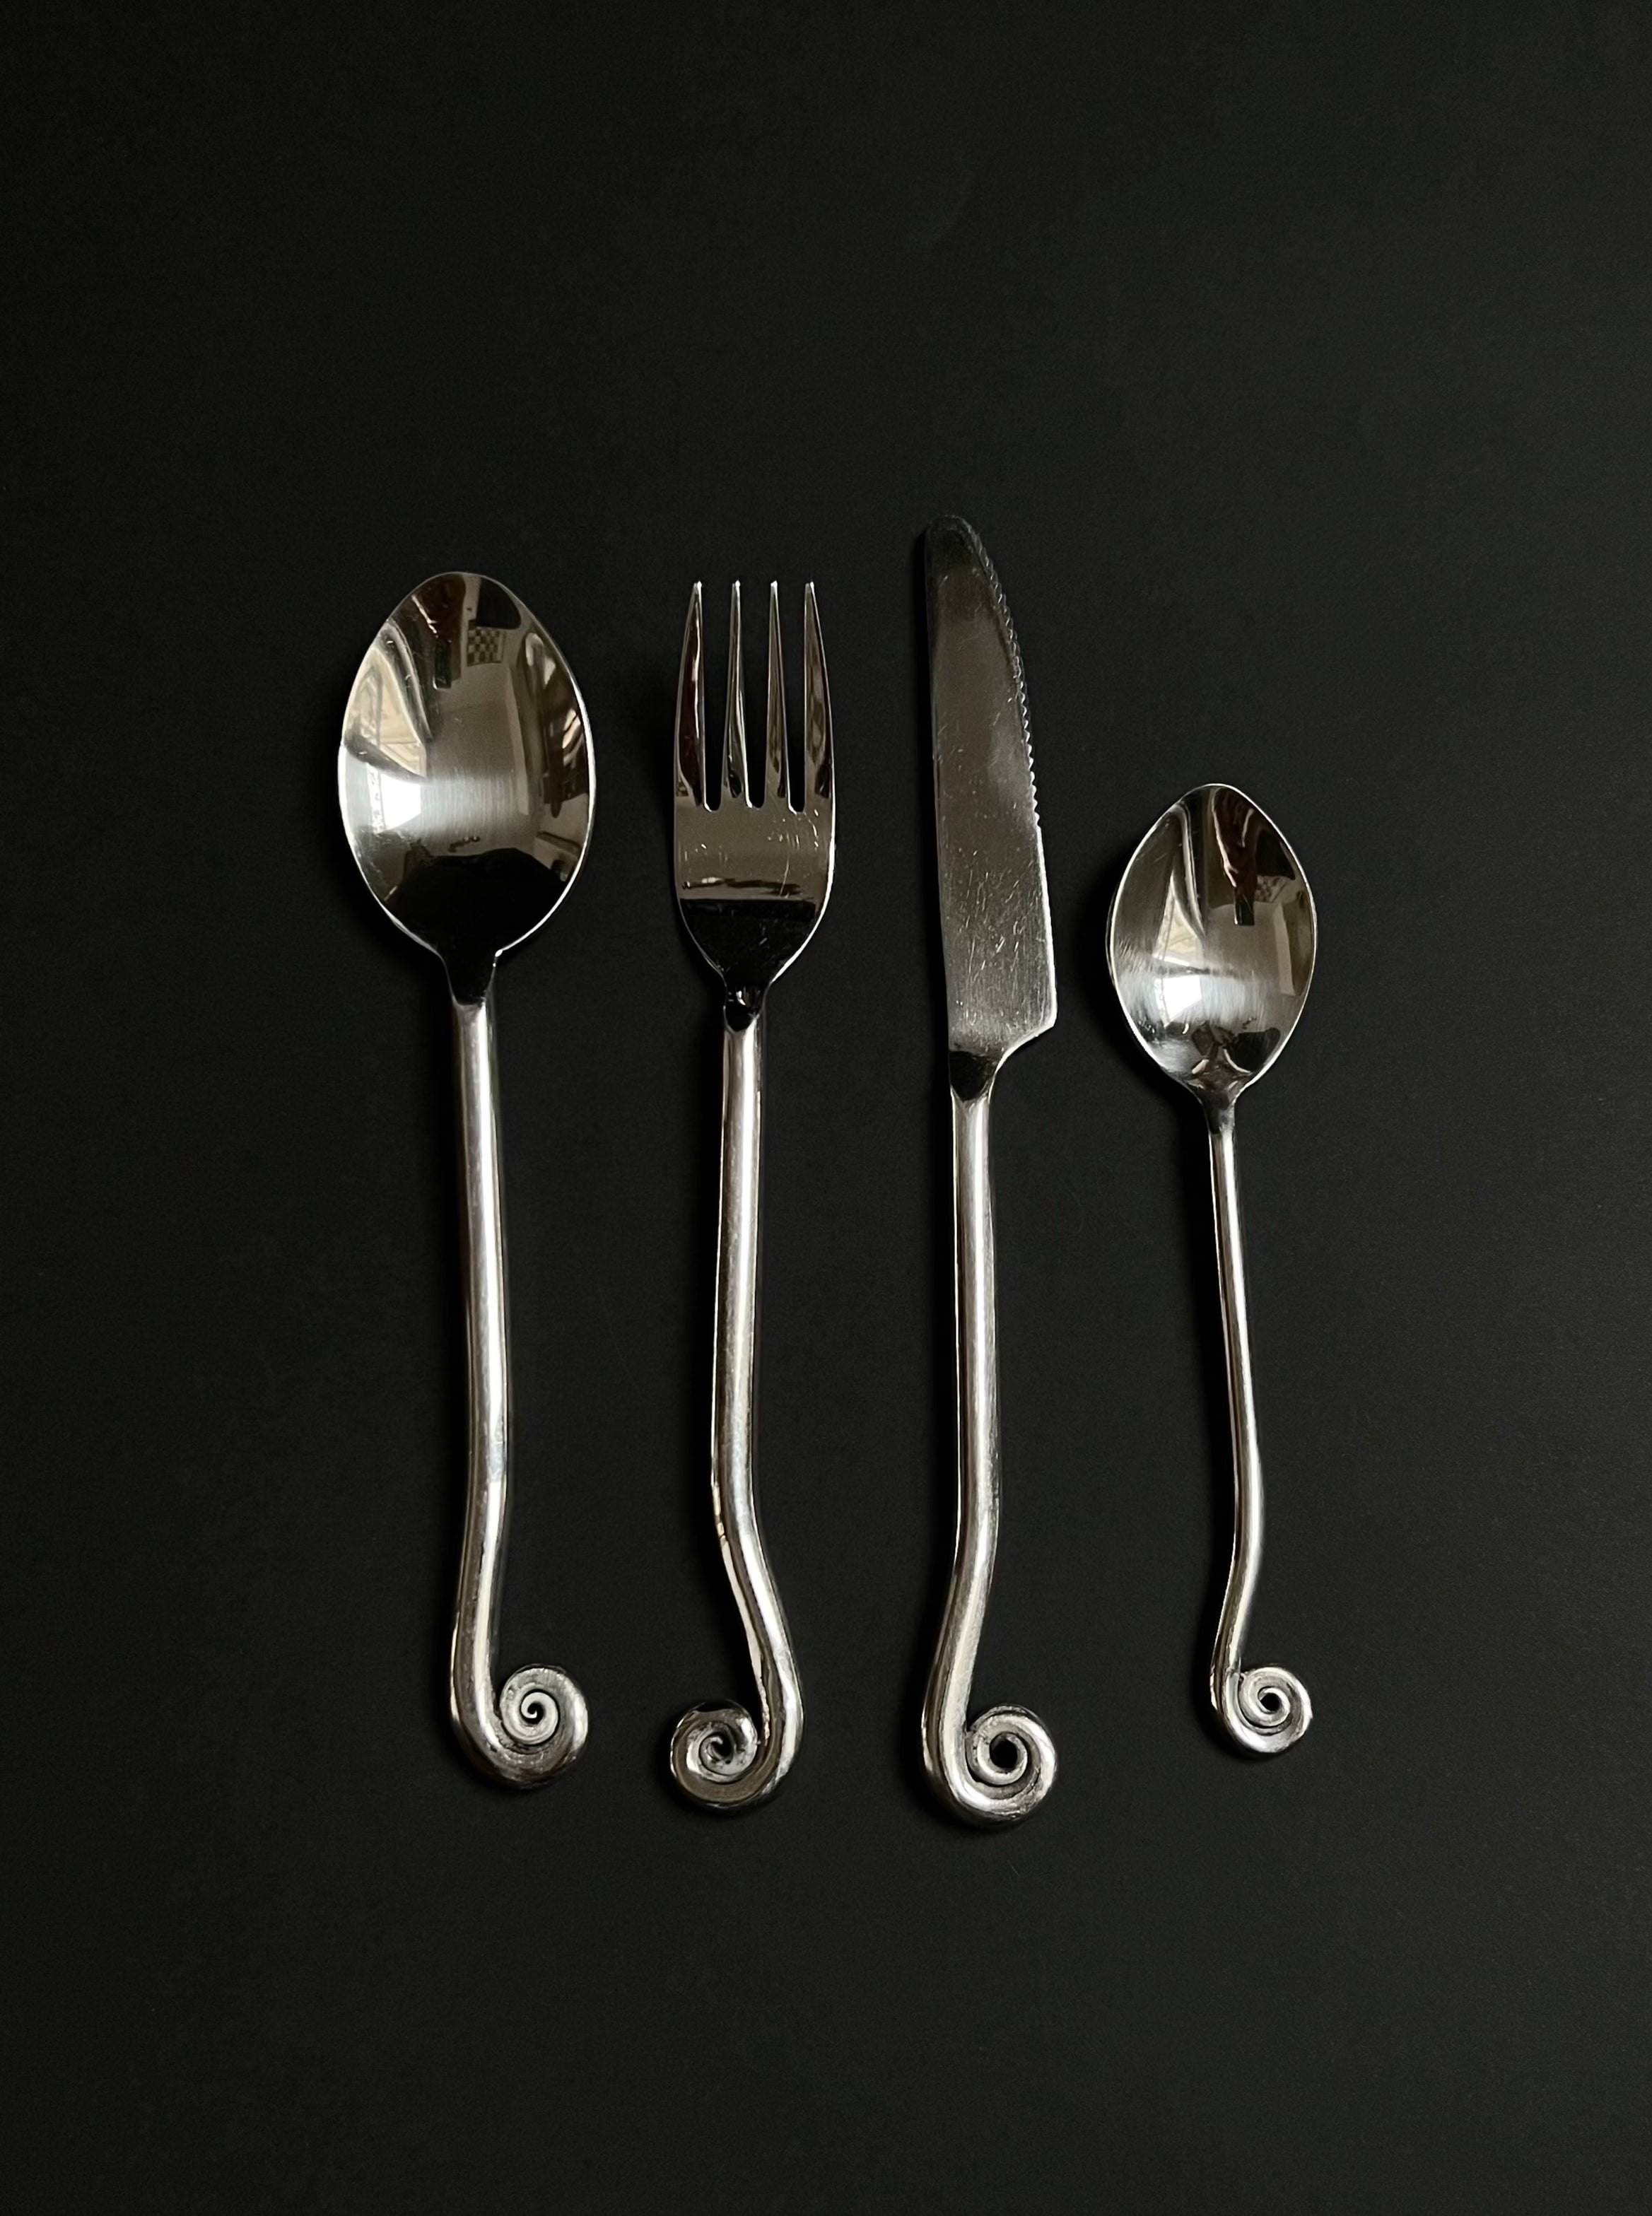 Four pieces of Manushi's Vintage Swirl Cutlery set—a spoon, fork, knife, and another spoon—with timeless design and spiral handles arranged neatly on a dark, matte surface.